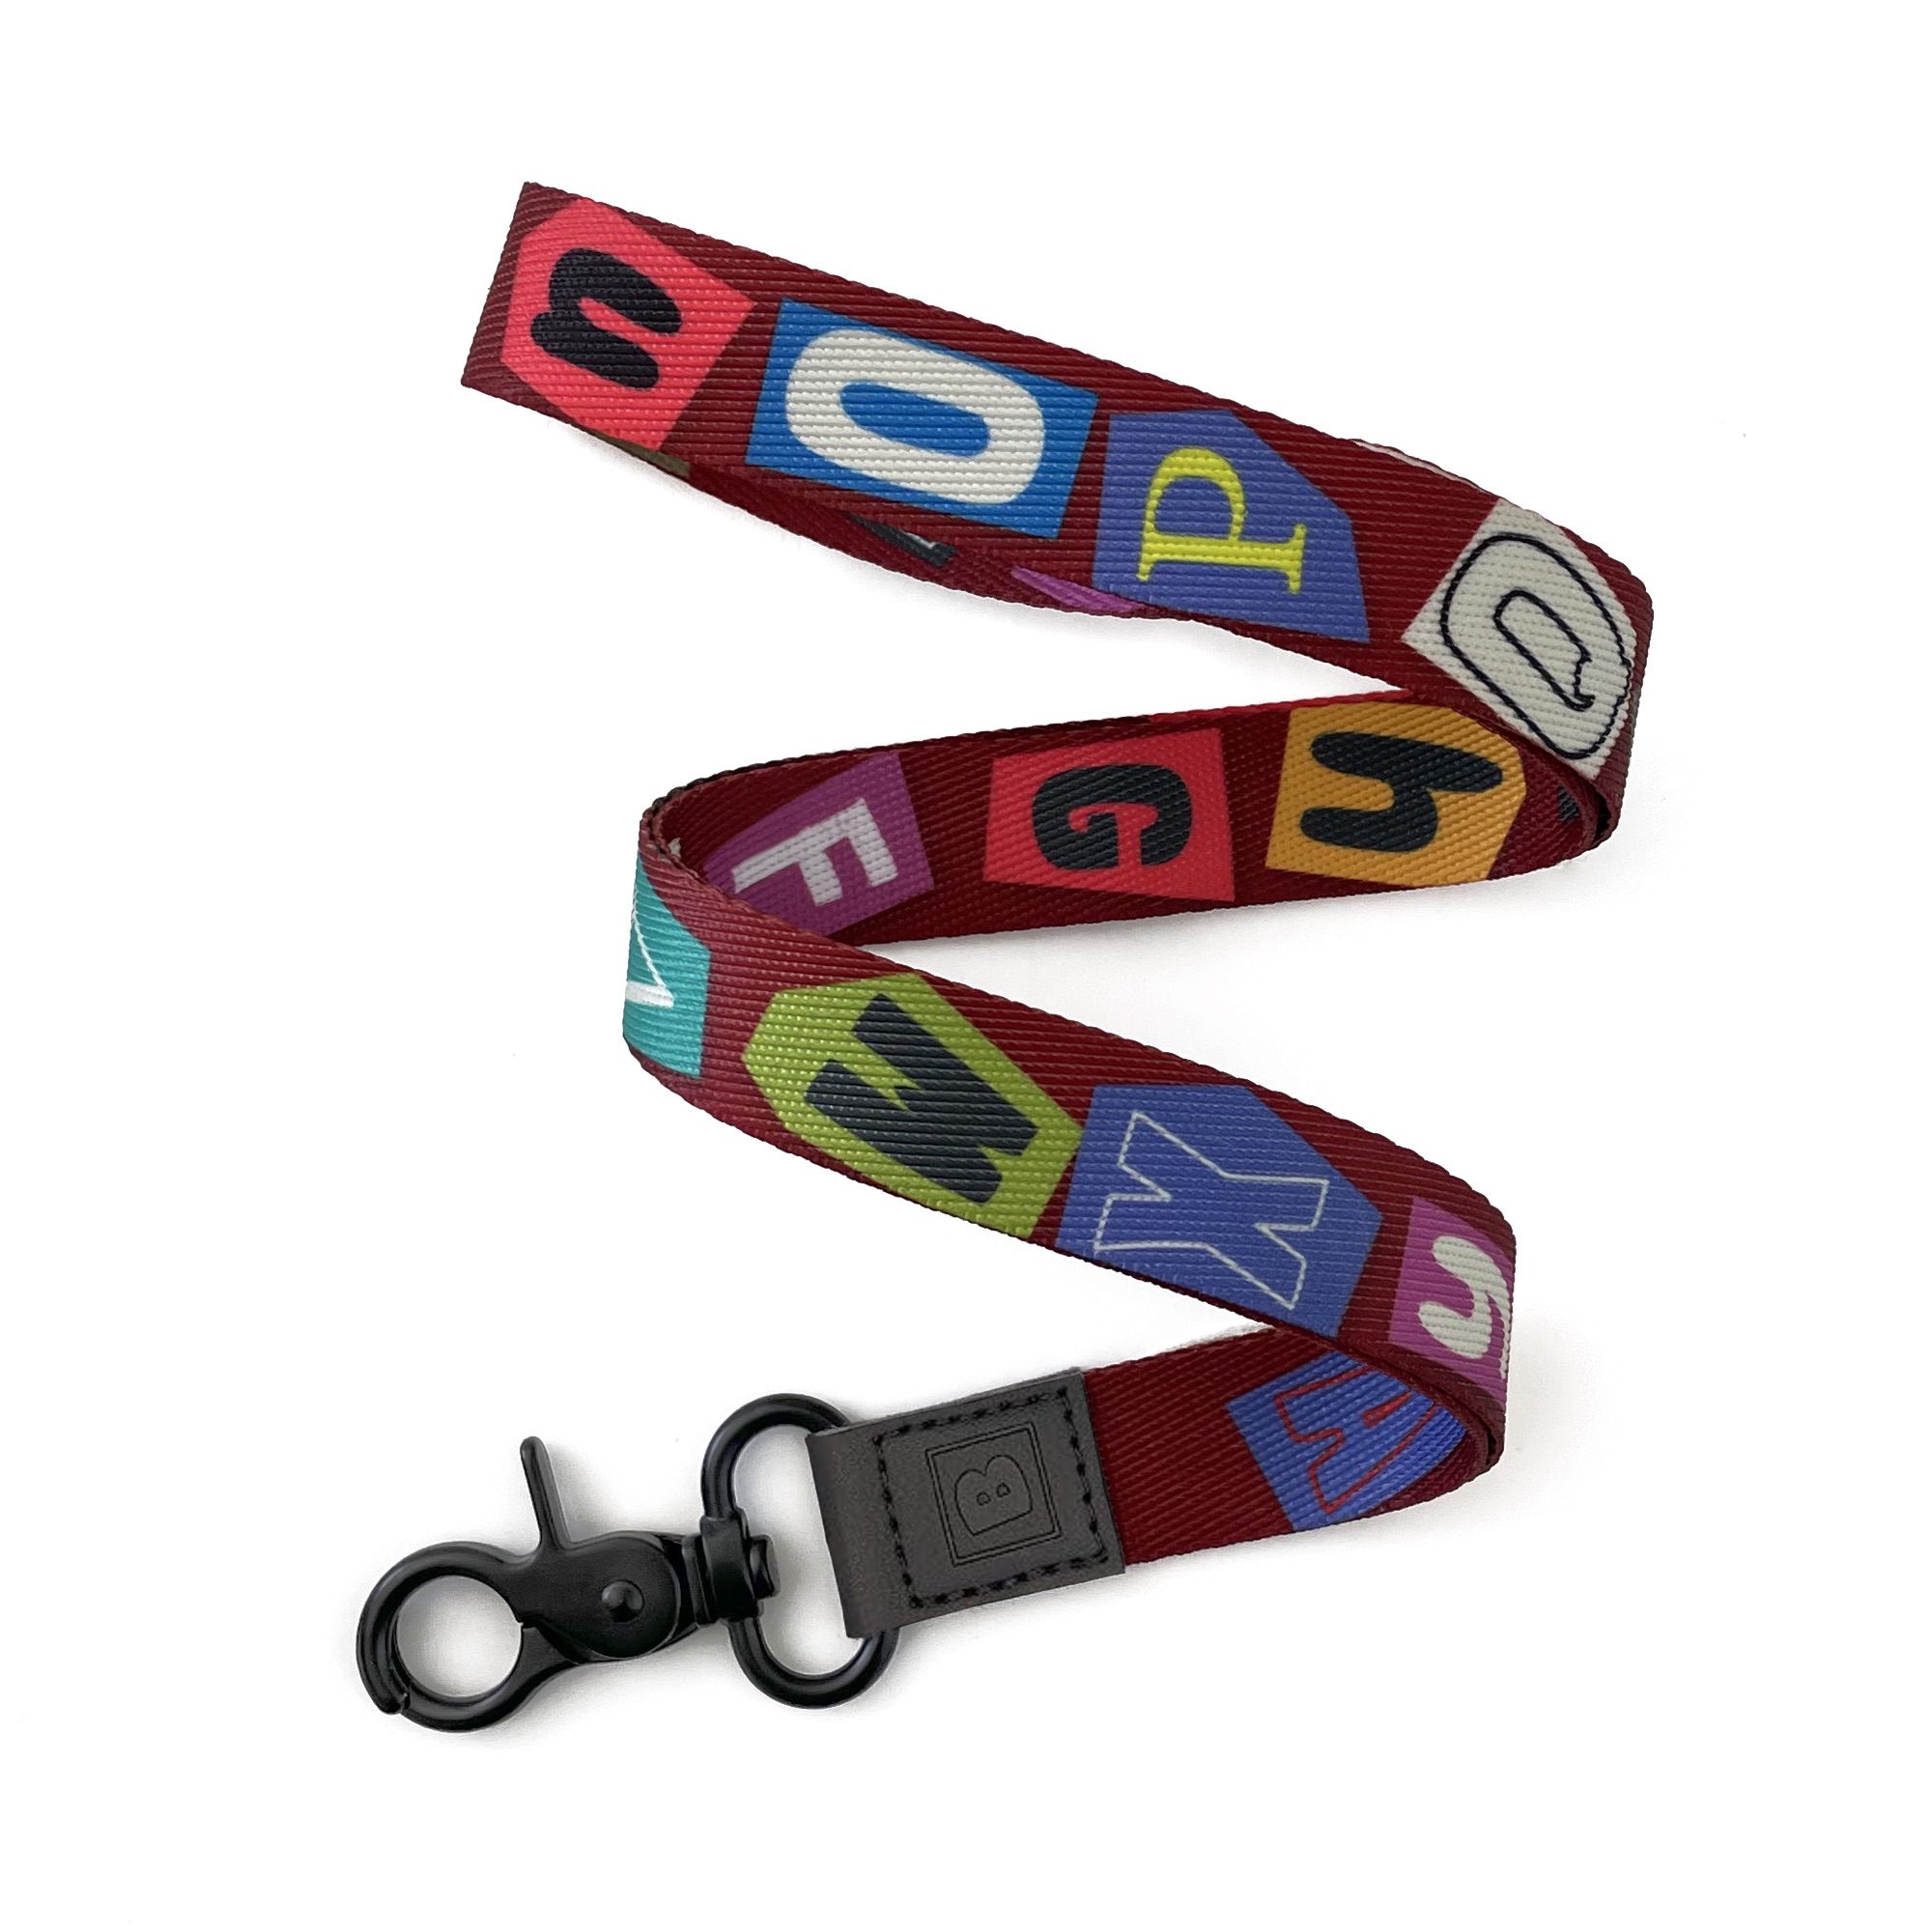 Alphabet Mastery: Burgundy Lanyard with ABC Letter Cutouts – Celebrate Learning!” by BadgeZoo